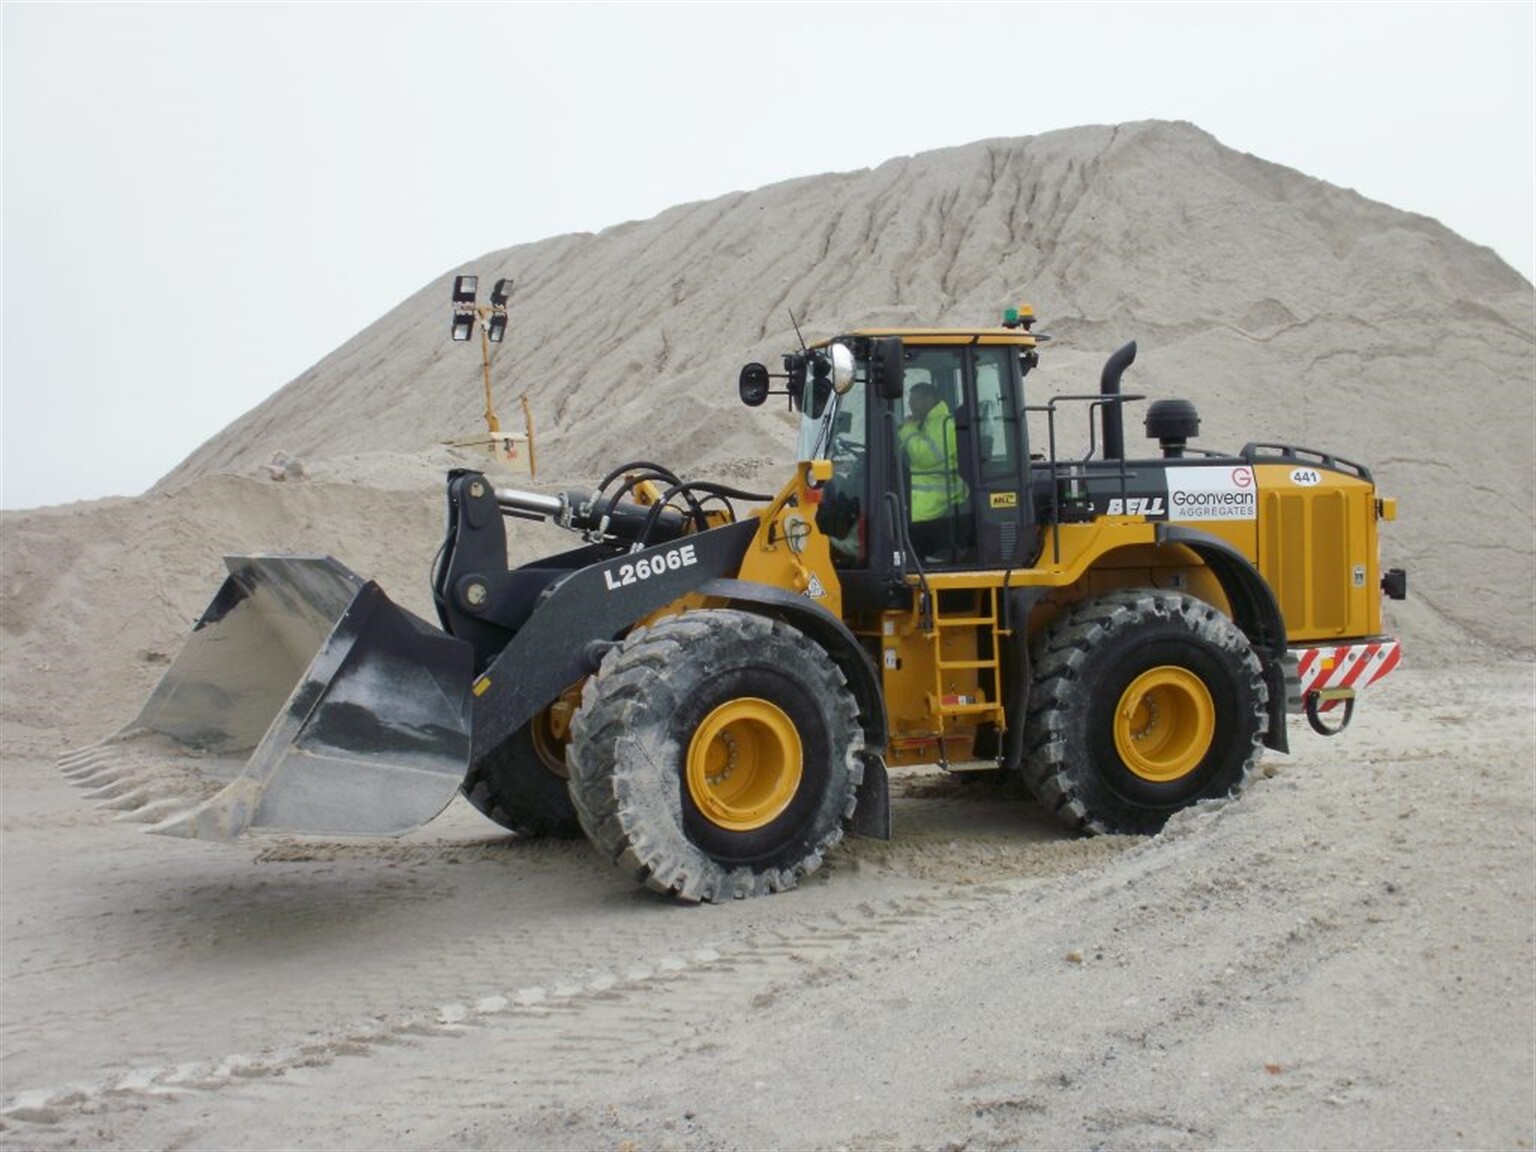 More Bell kit for Goonvean Aggregates